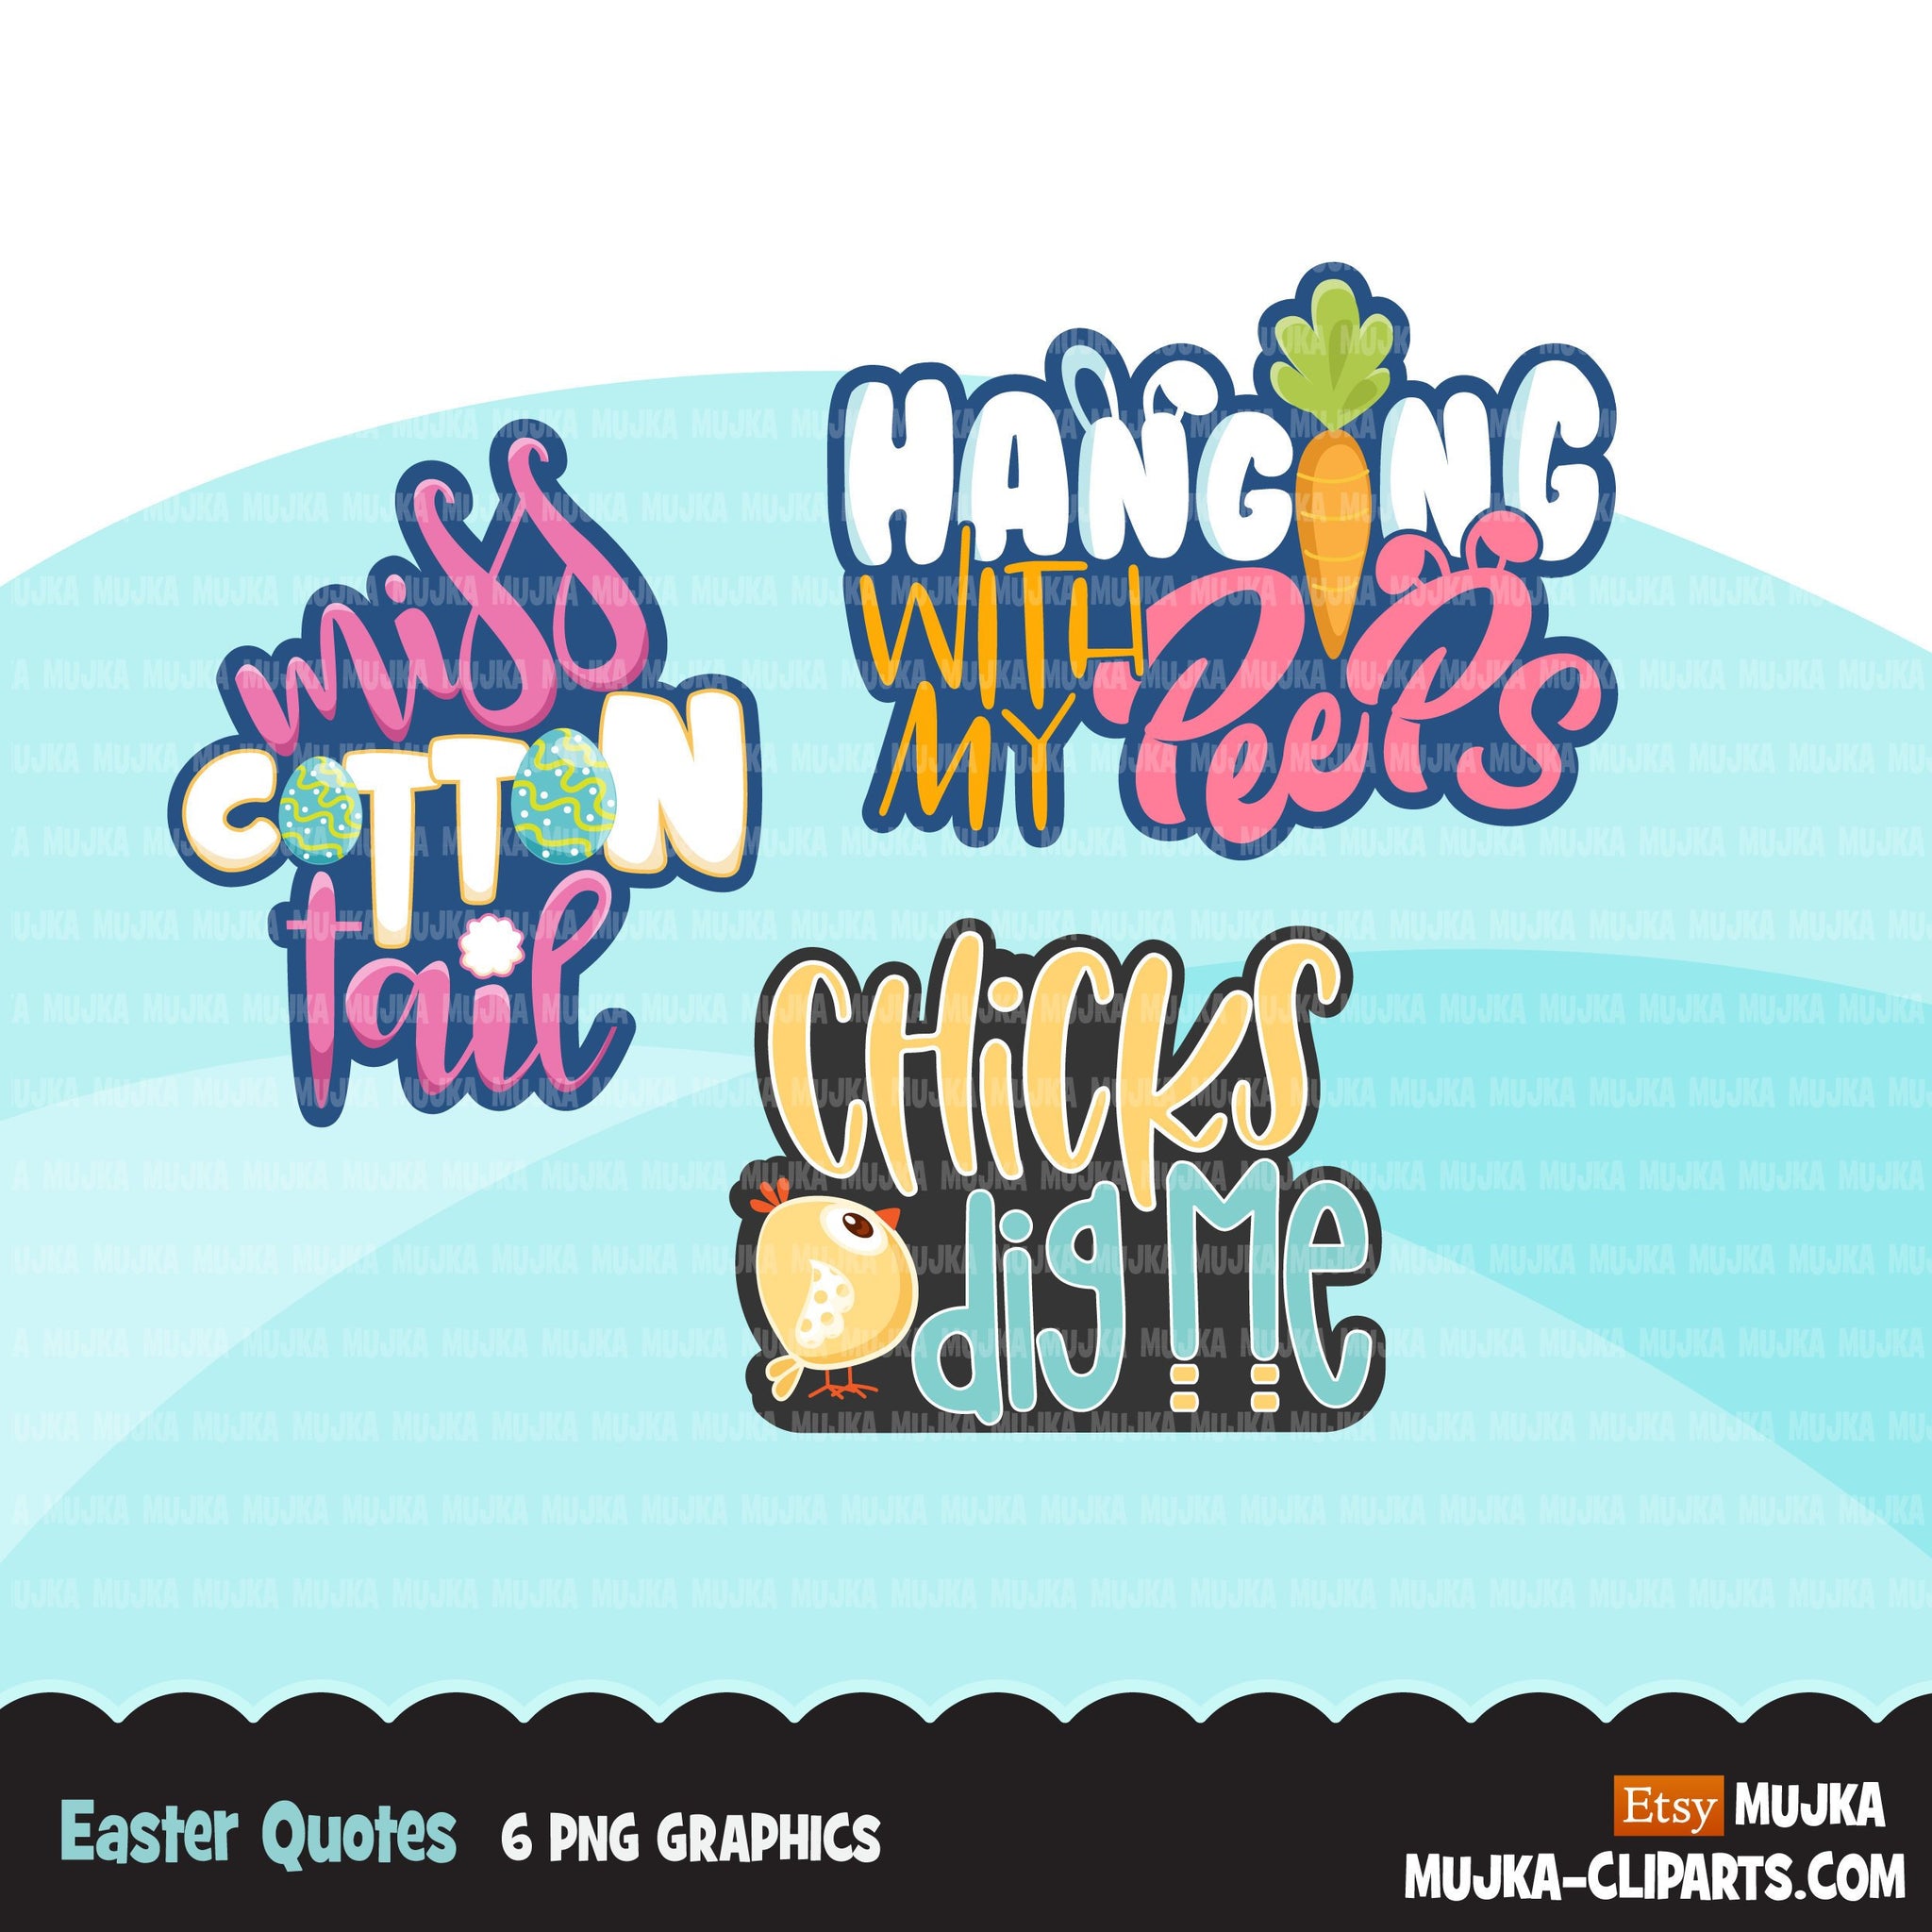 Easter Quotes Clipart, hanging with my peeps, miss cotton tail, chicks dig me graphics, sublimation PNG commercial use clip art